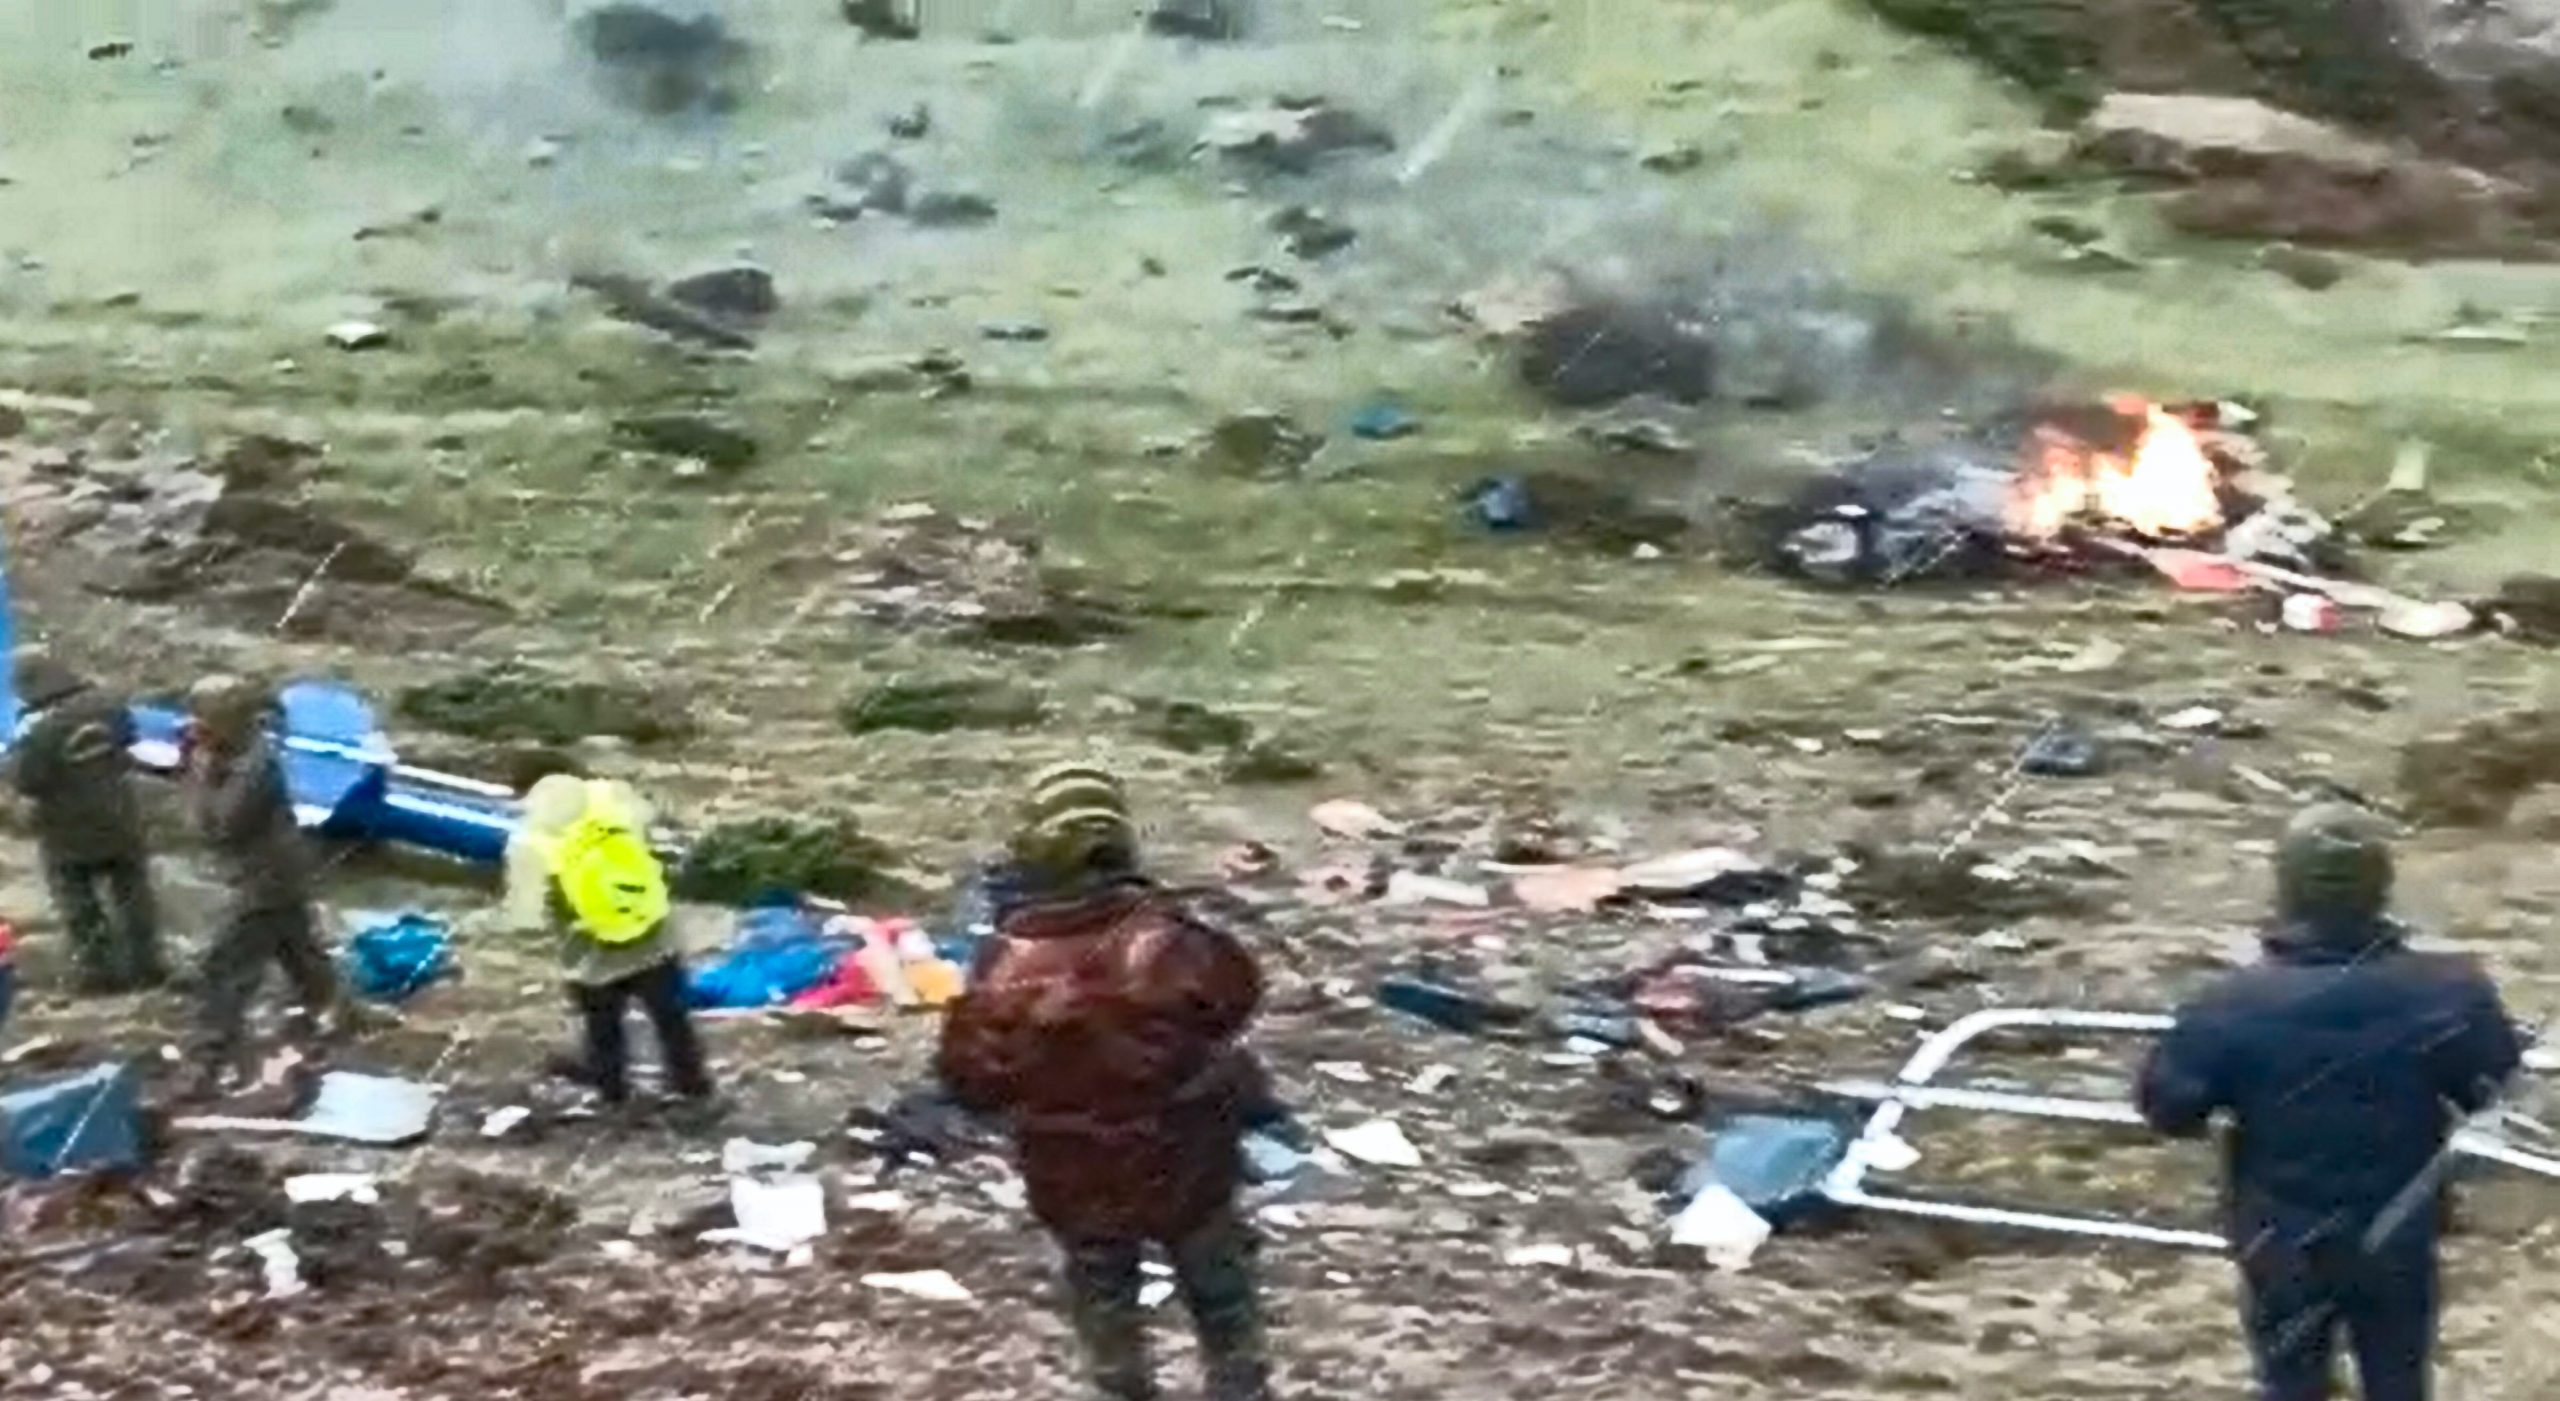 Kedarnath helicopter crash: All you need to know